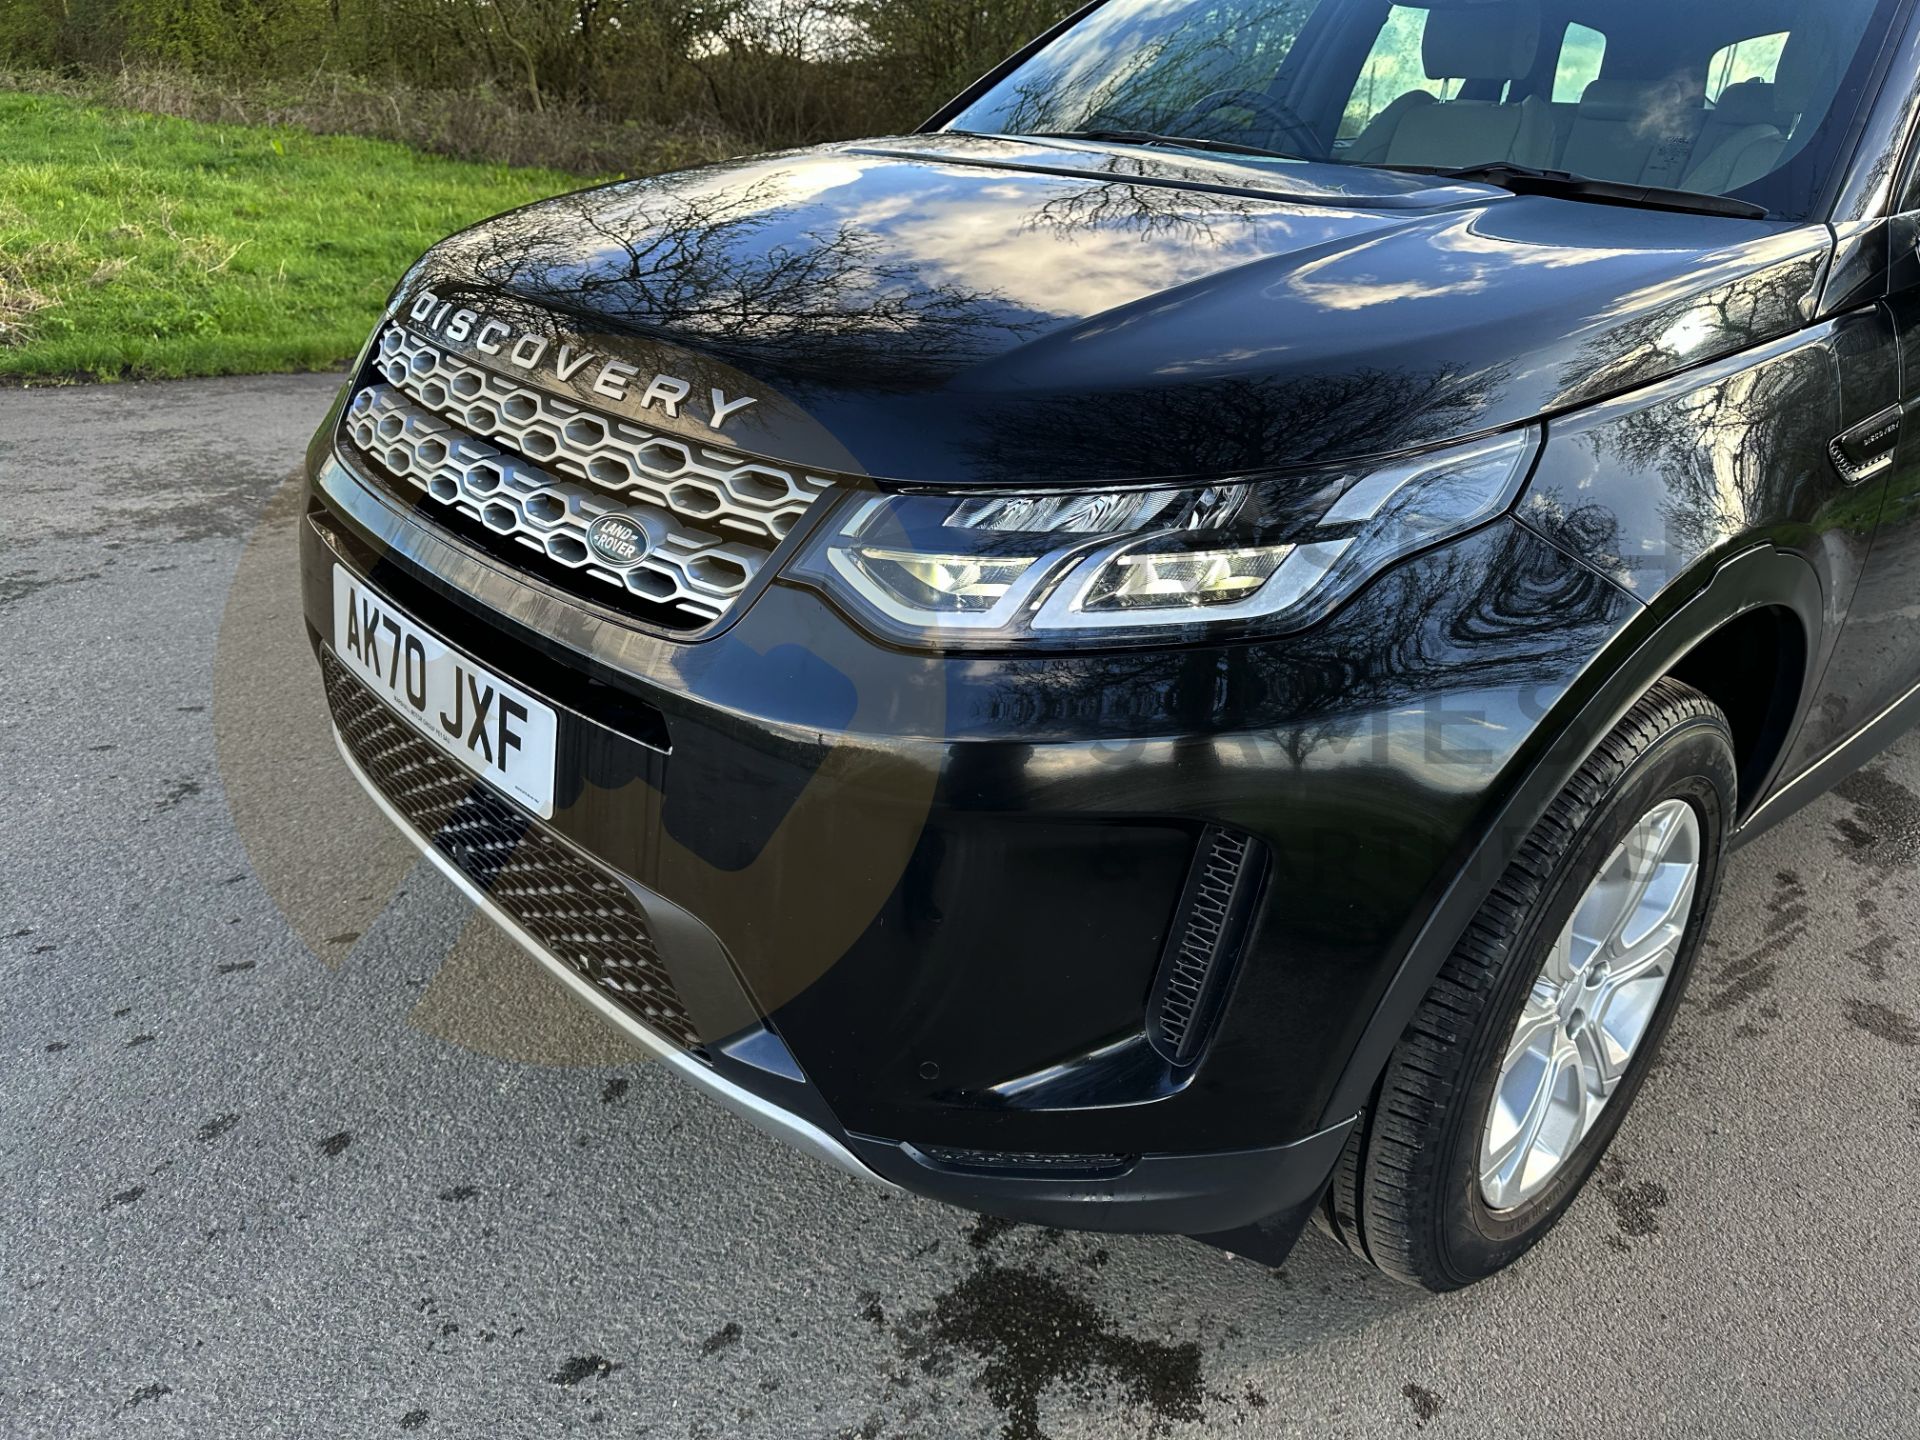 (ON SALE) LAND ROVER DISCOVERY SPORT (2021 - ALL NEW FACELIFT MODEL) 2.0 DIESEL - AUTO STOP/START - Image 18 of 50